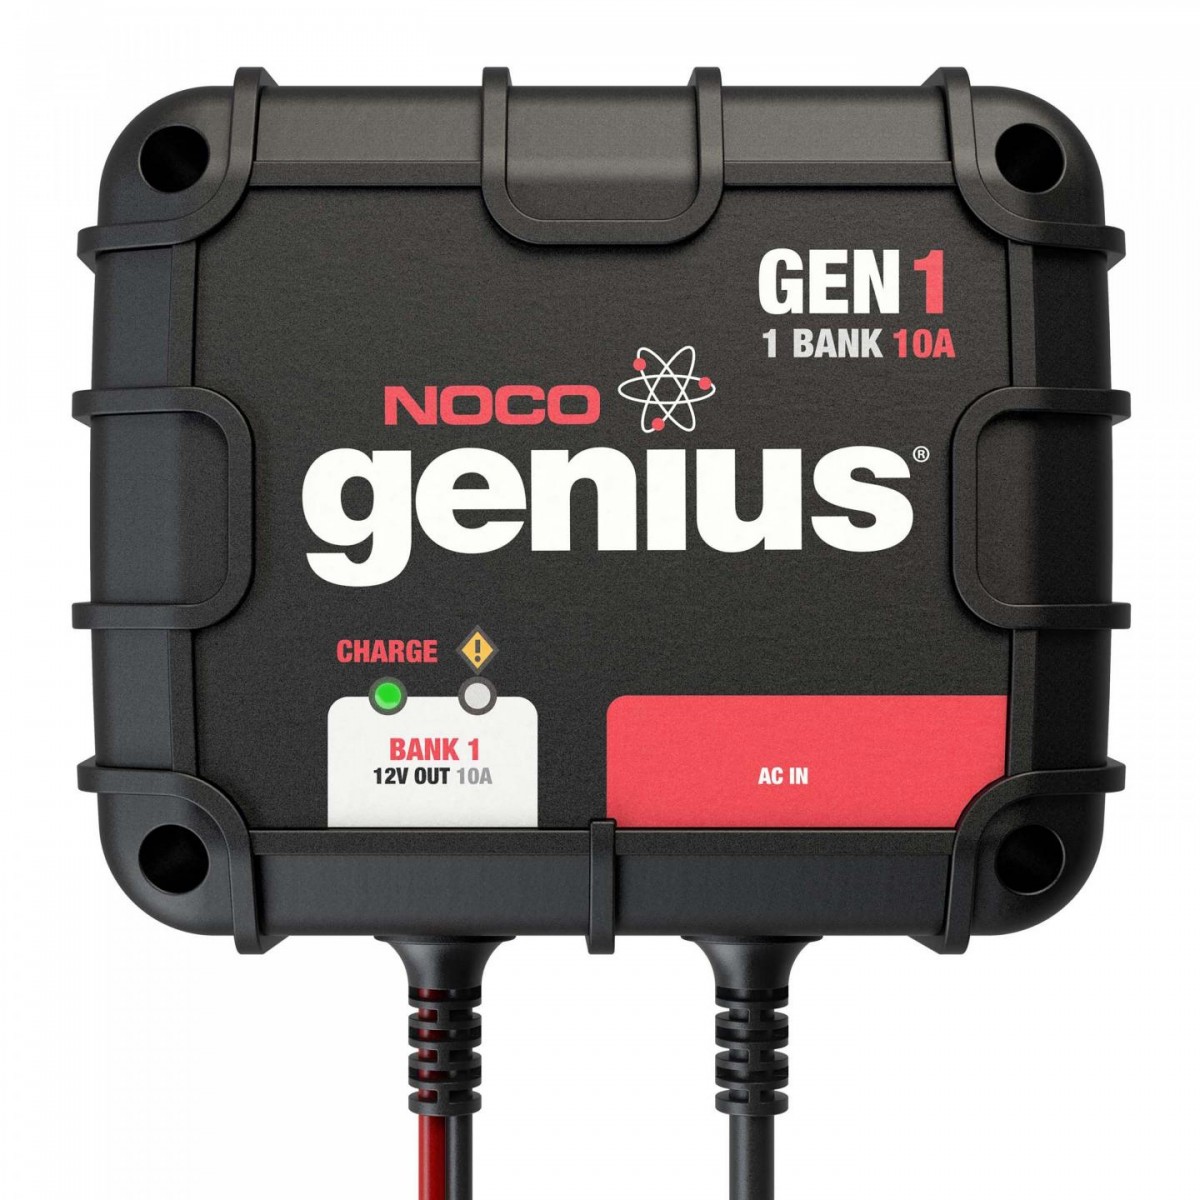 NOCO GENM1 1-Bank 4A On-Board Battery Charger 